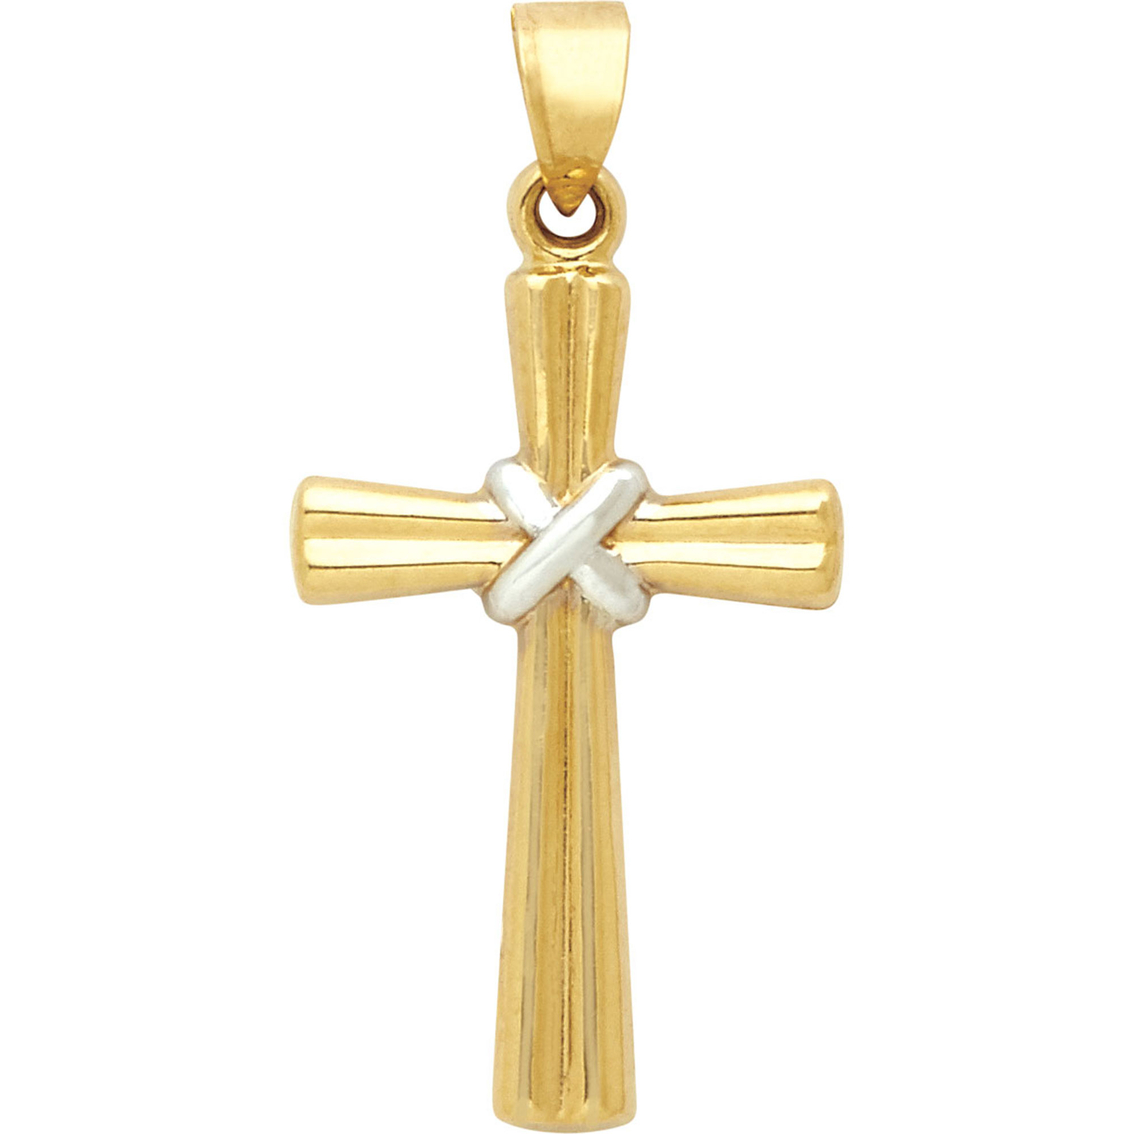 ... jewelry watches fashion jewelry fashion necklaces crosses crucifixes